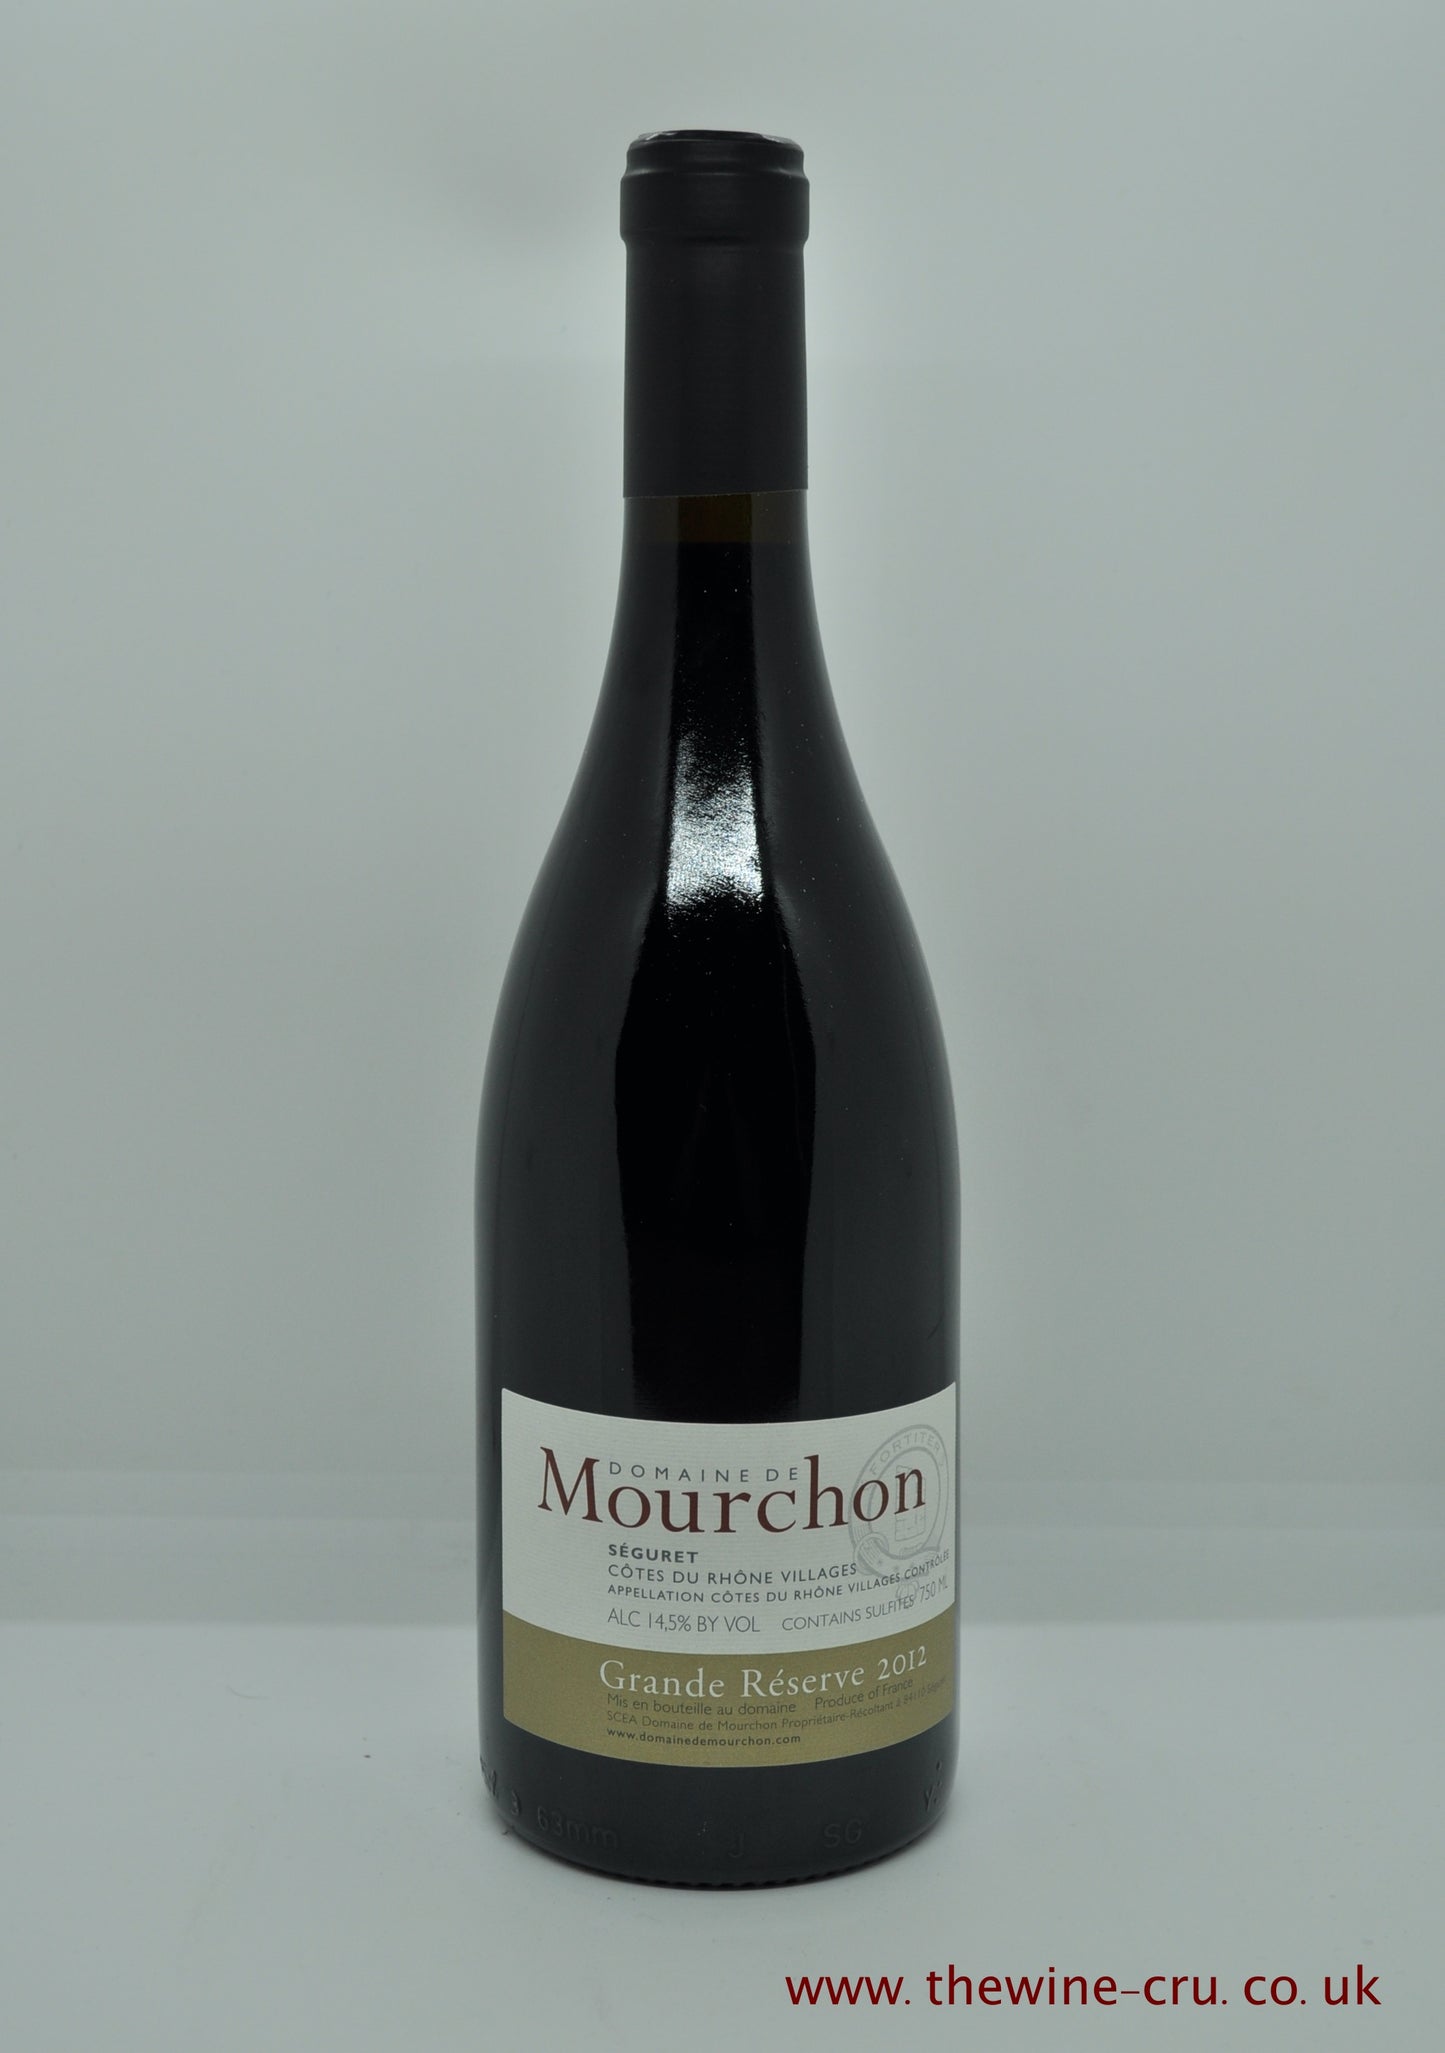 2012 vintage red wine. Seguret Cotes Du Rhone Villages Grande Reserve Domaine Mourchon 2012. France Rhone. Immediate delivery. Free local delivery. Gift wrapping available.